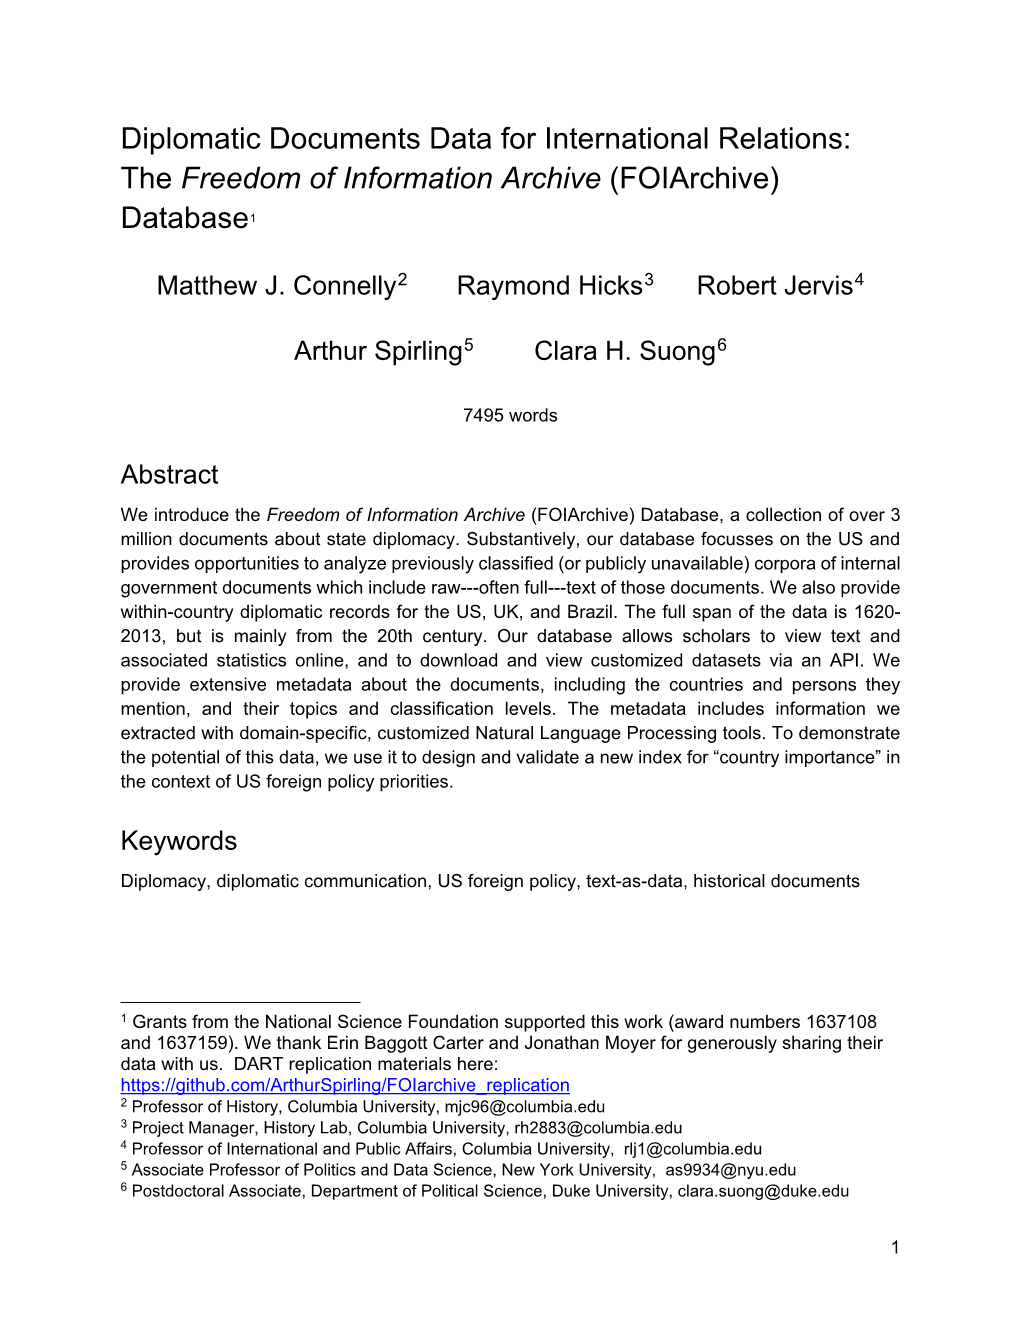 Diplomatic Documents Data for International Relations: the Freedom of Information Archive (Foiarchive) Database1